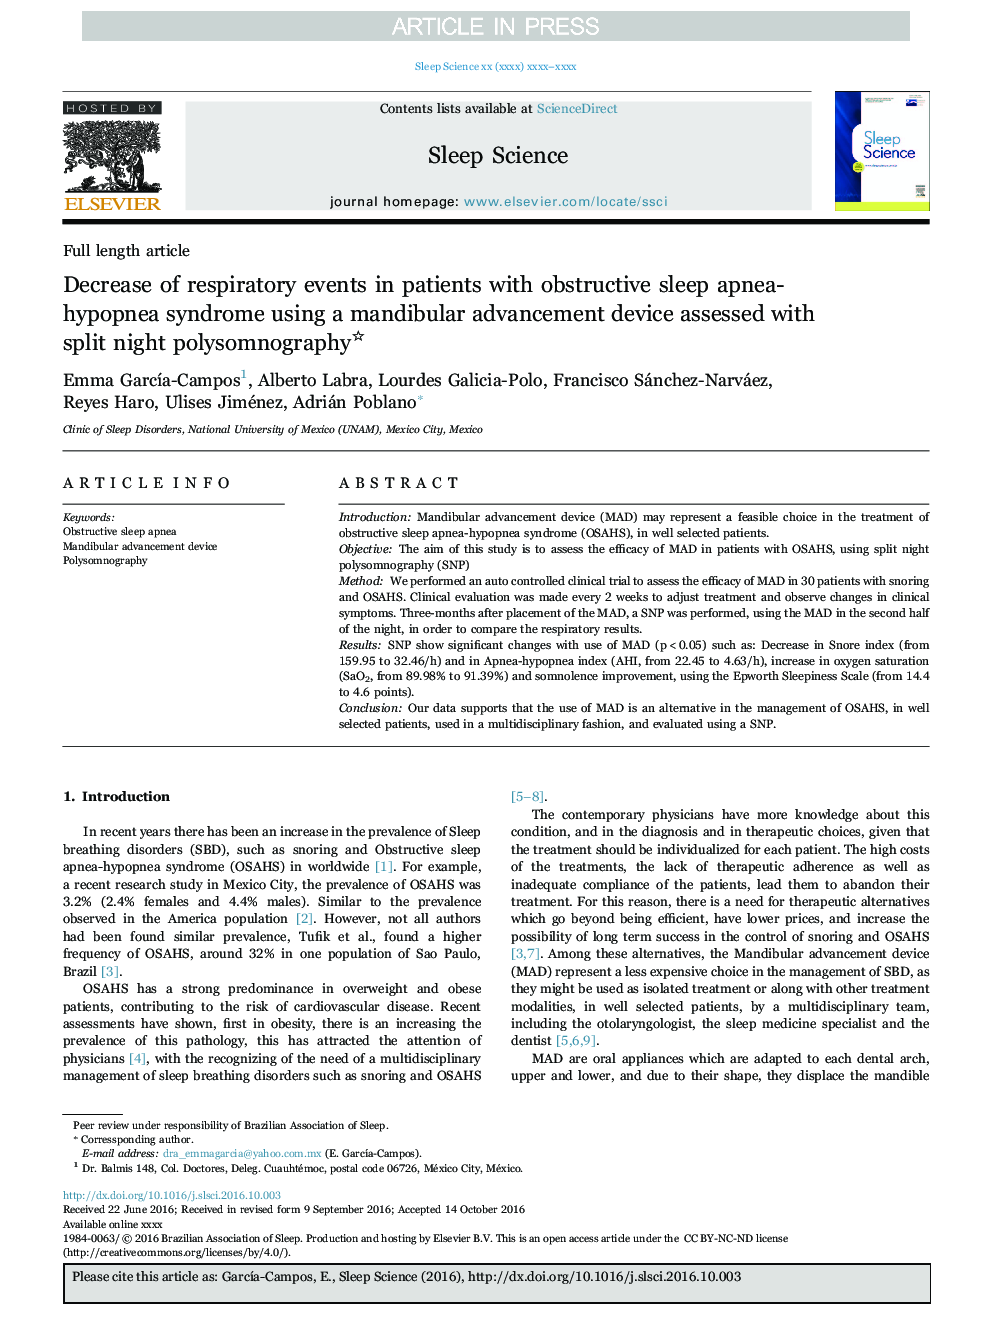 Decrease of respiratory events in patients with obstructive sleep apnea-hypopnea syndrome using a mandibular advancement device assessed with split night polysomnography